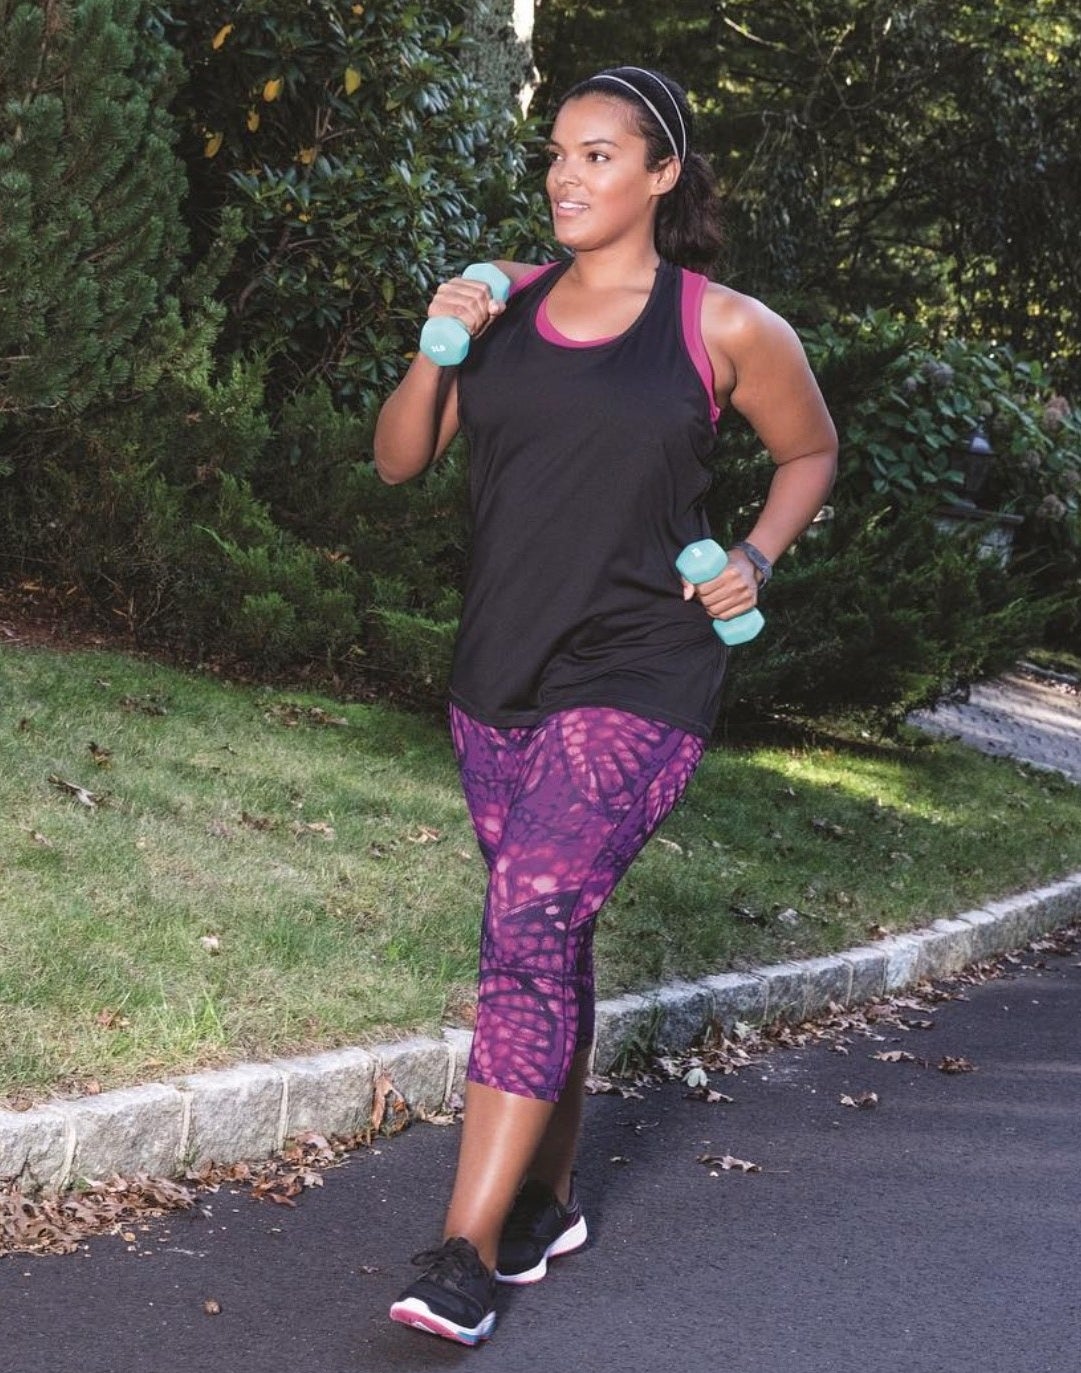 A person wearing the leggings in a bold pattern while taking a walk with weights outside